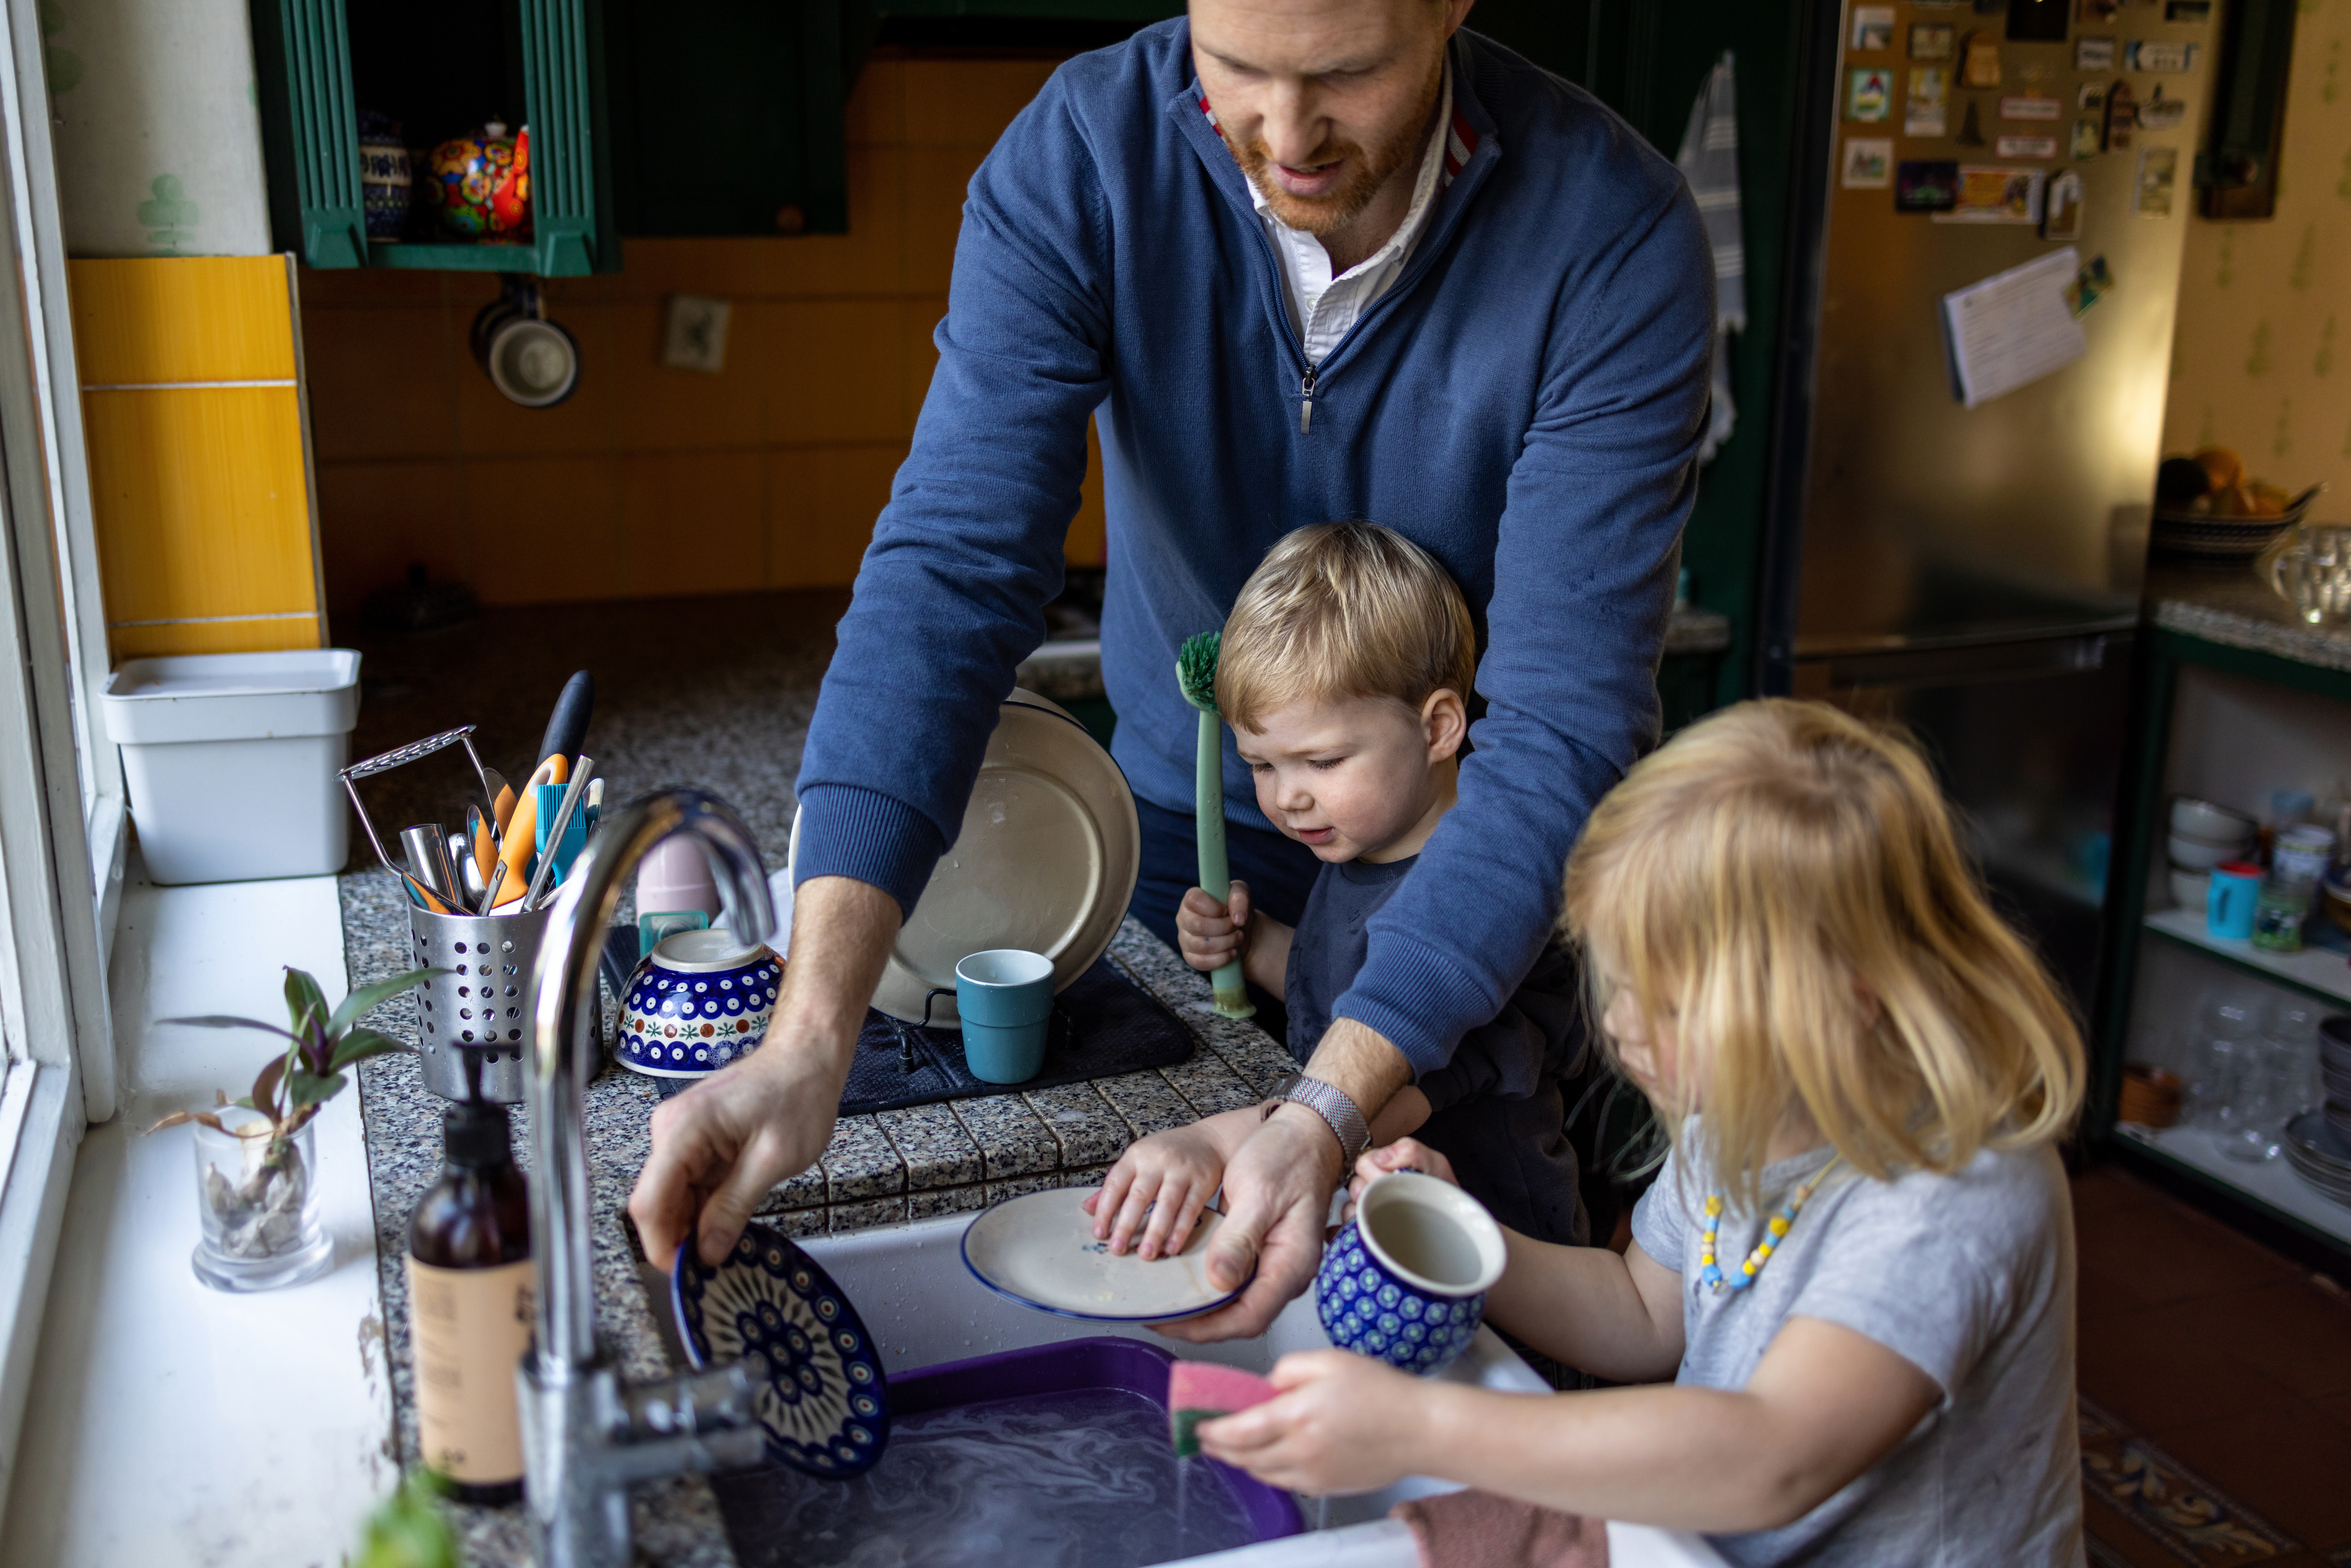 A stay-at-home father washes dishes with his two kids